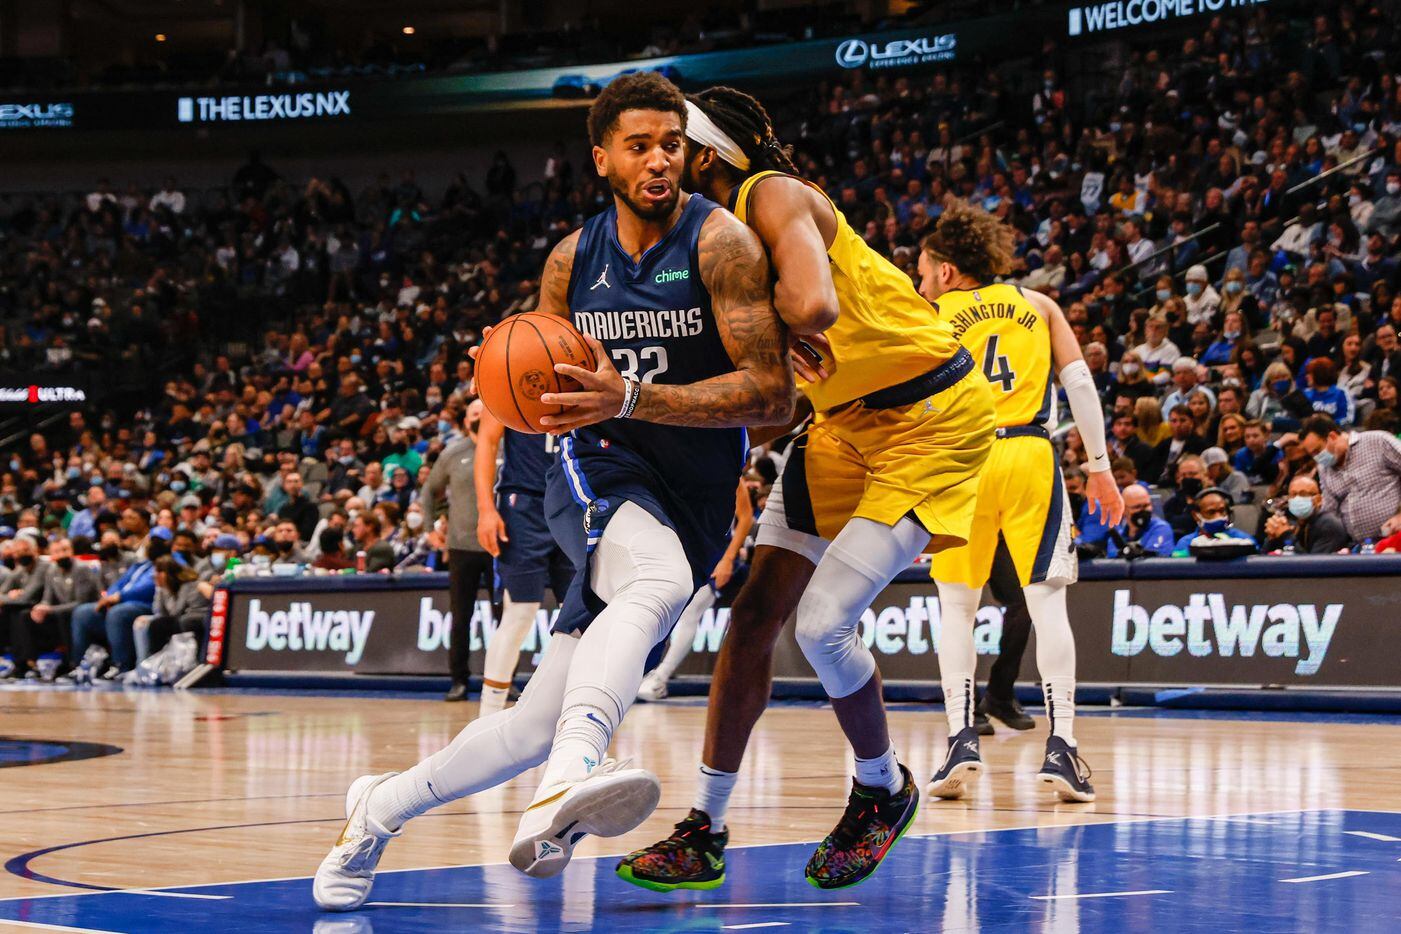 Dallas Mavericks forward Marquese Chriss (32) drives to the basket as Indiana Pacers forward Isaiah Jackson (23) tries to block him during the second half at the American Airlines Center in Dallas on Saturday, January 29, 2022.